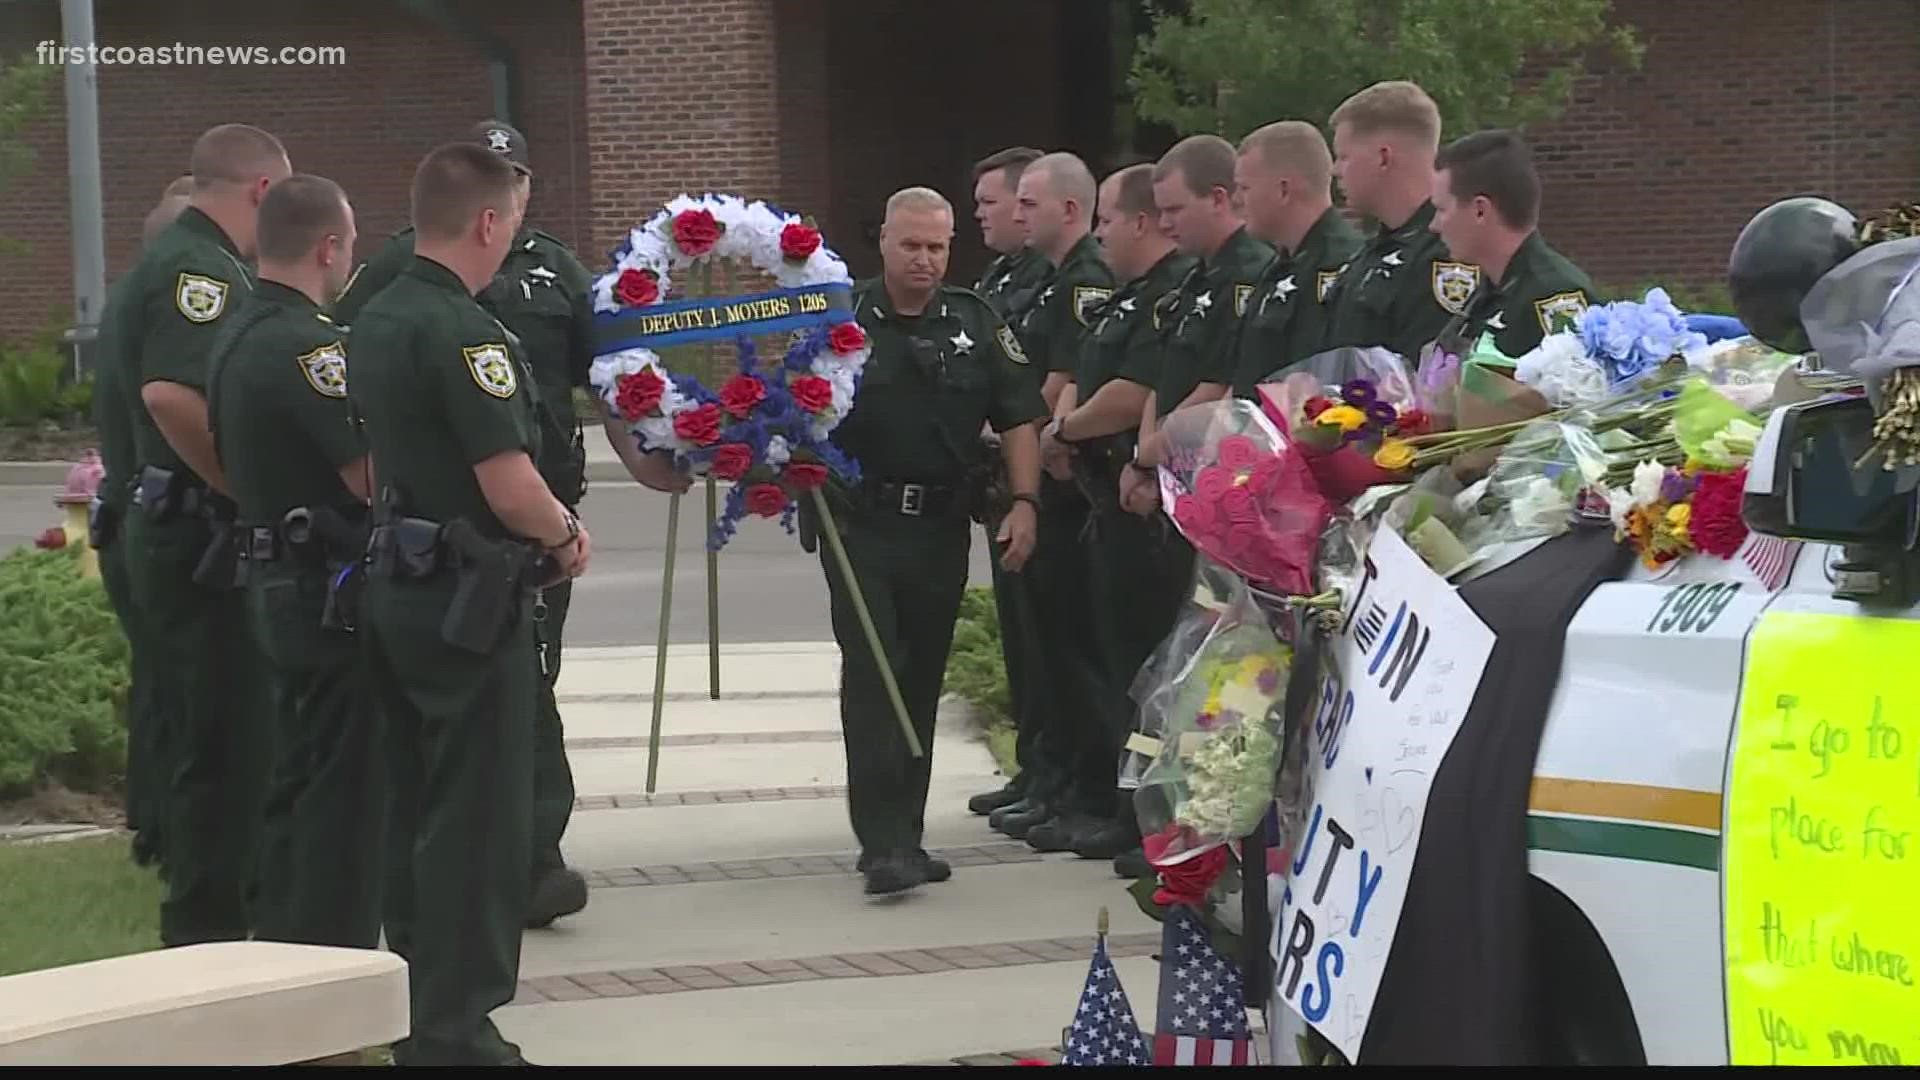 On Friday, Moyers' team added a blue and white wreath to the memorial that’s been forming around his patrol car outside the sheriff’s office.